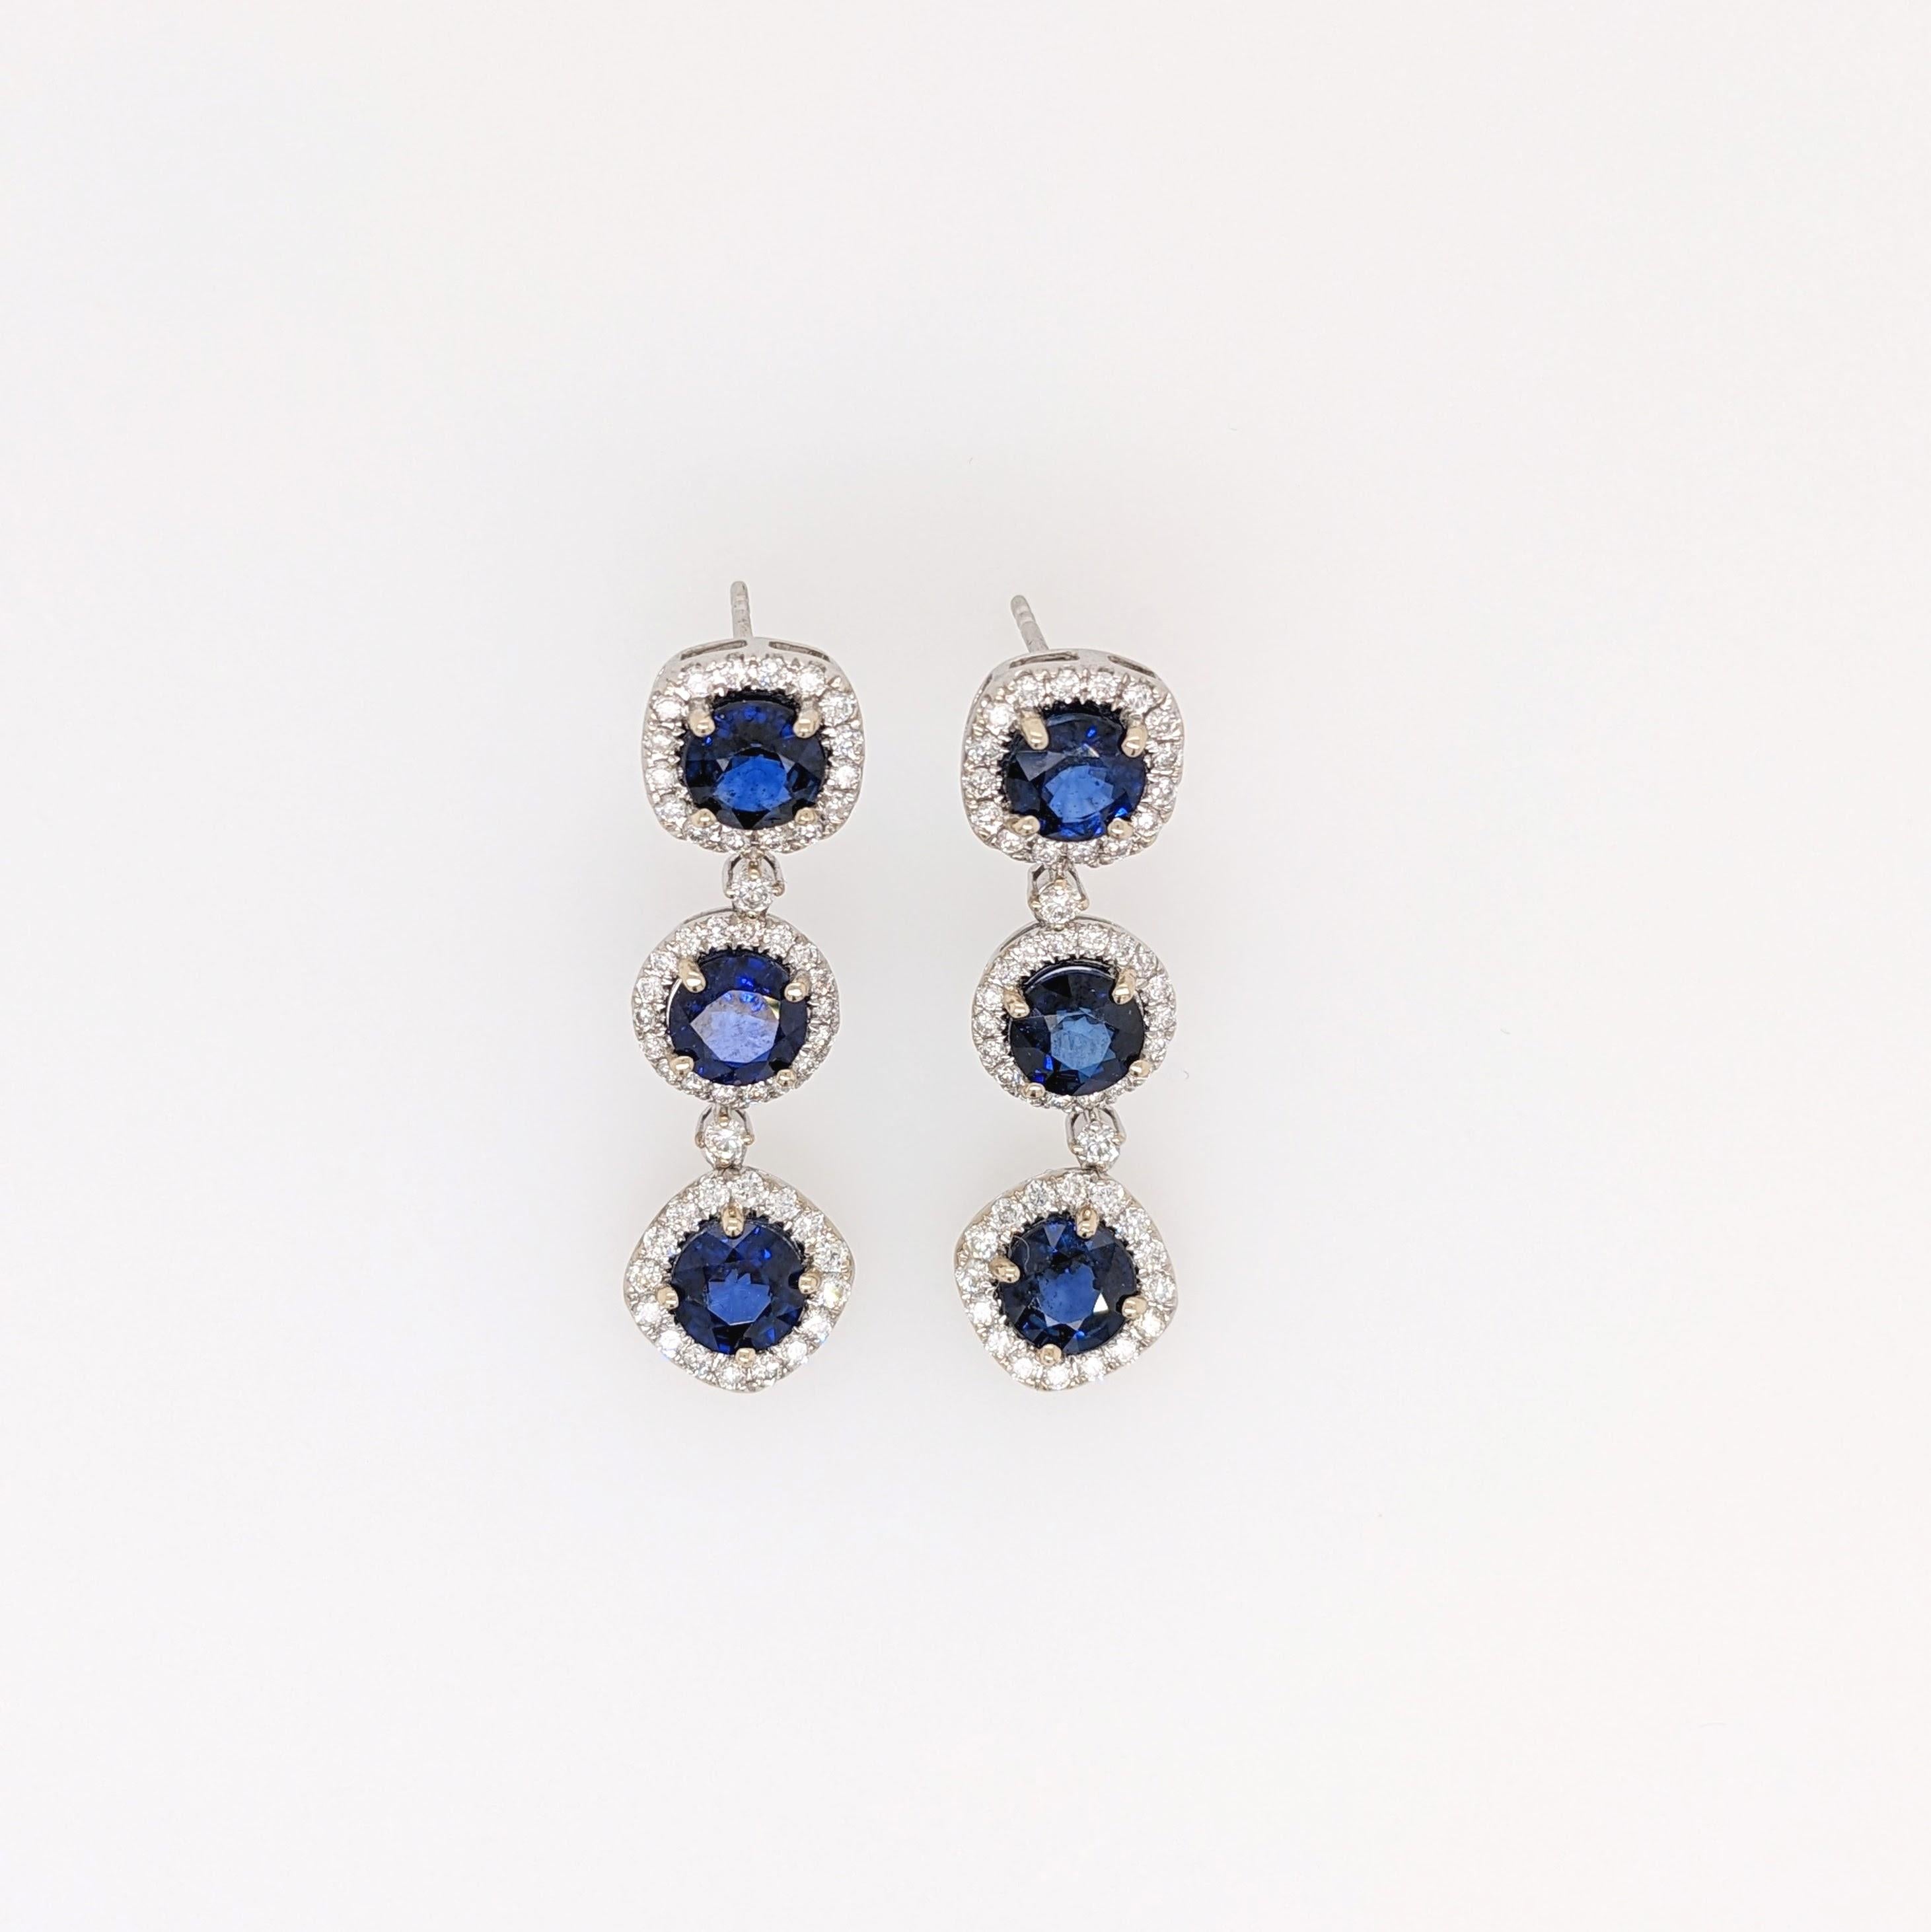 Item Type: Earring
Type: Sapphire
Treatment: Diffused
Hardness: 9
Shape: Round
Size: 6mm
Weight: 6/5.45cts
Metal: 14k/6.48 grams
Diamonds S/I GH: 105/1.1ts
Sku: AJE125/6298

These studs are made with solid 14k gold and natural earth mined SI G/H